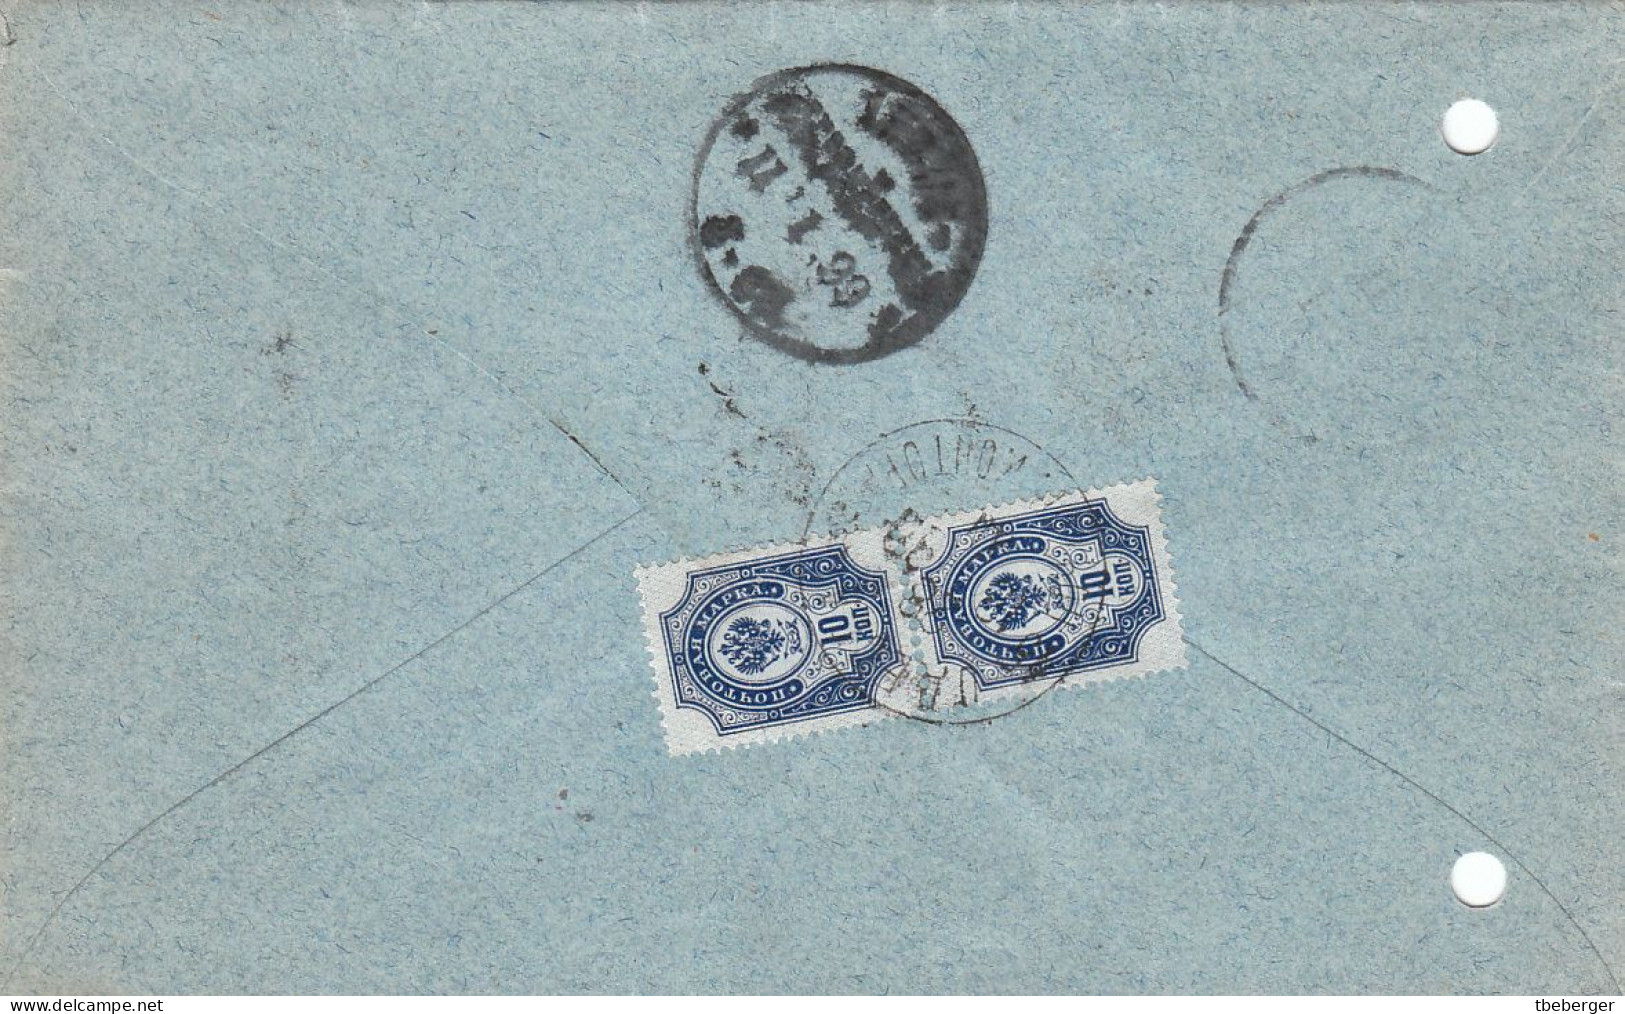 Russia 1899 Registered Cover Odessa -> Leipzig Germany 20 Kop, No Provisional Usage Of 1899 Label, Office Punched (x69) - Covers & Documents